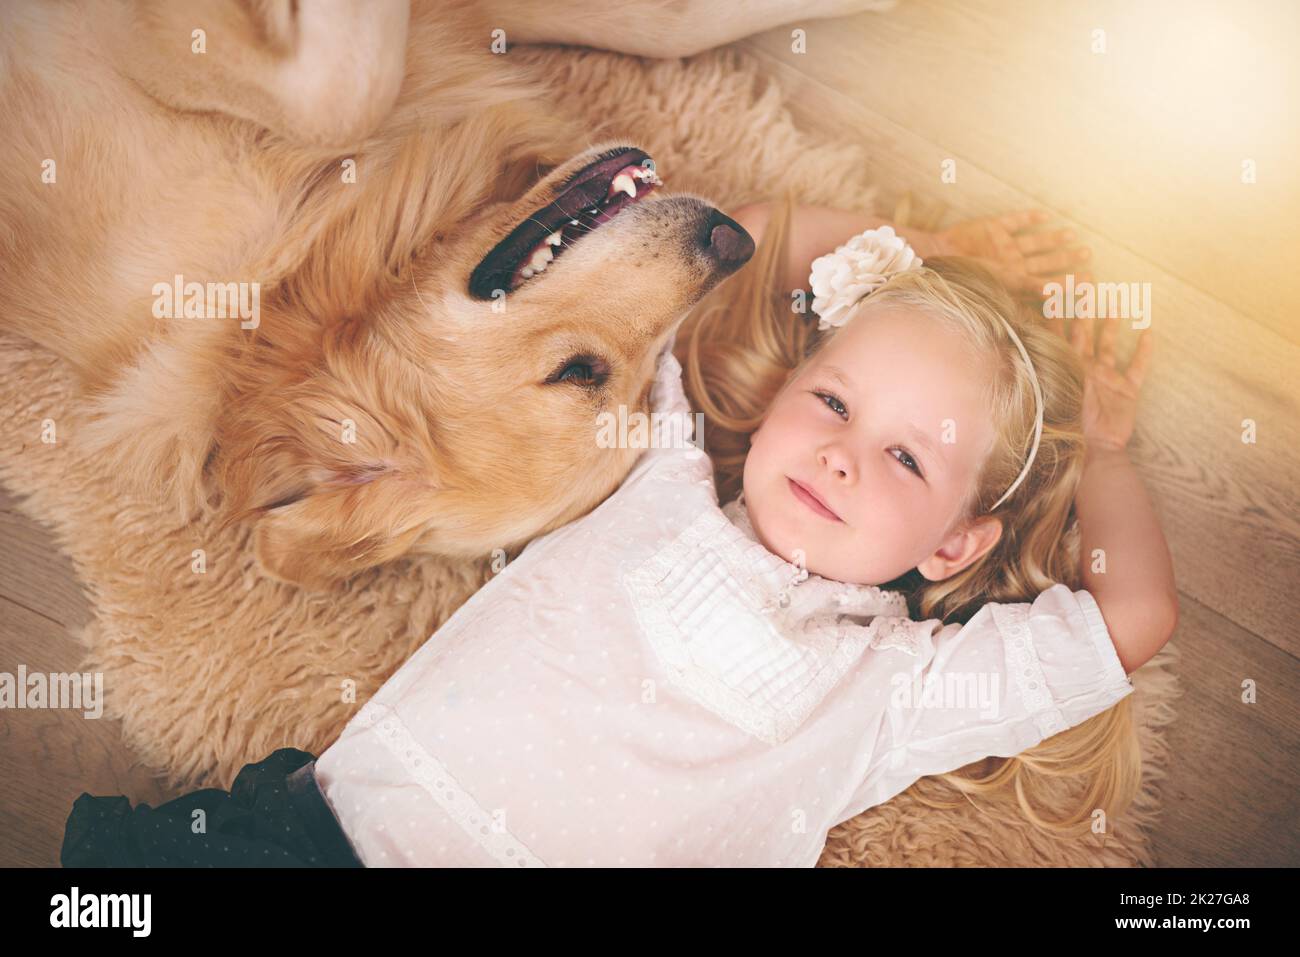 Hes my home dog. An adorable little girl with her dog at home. Stock Photo